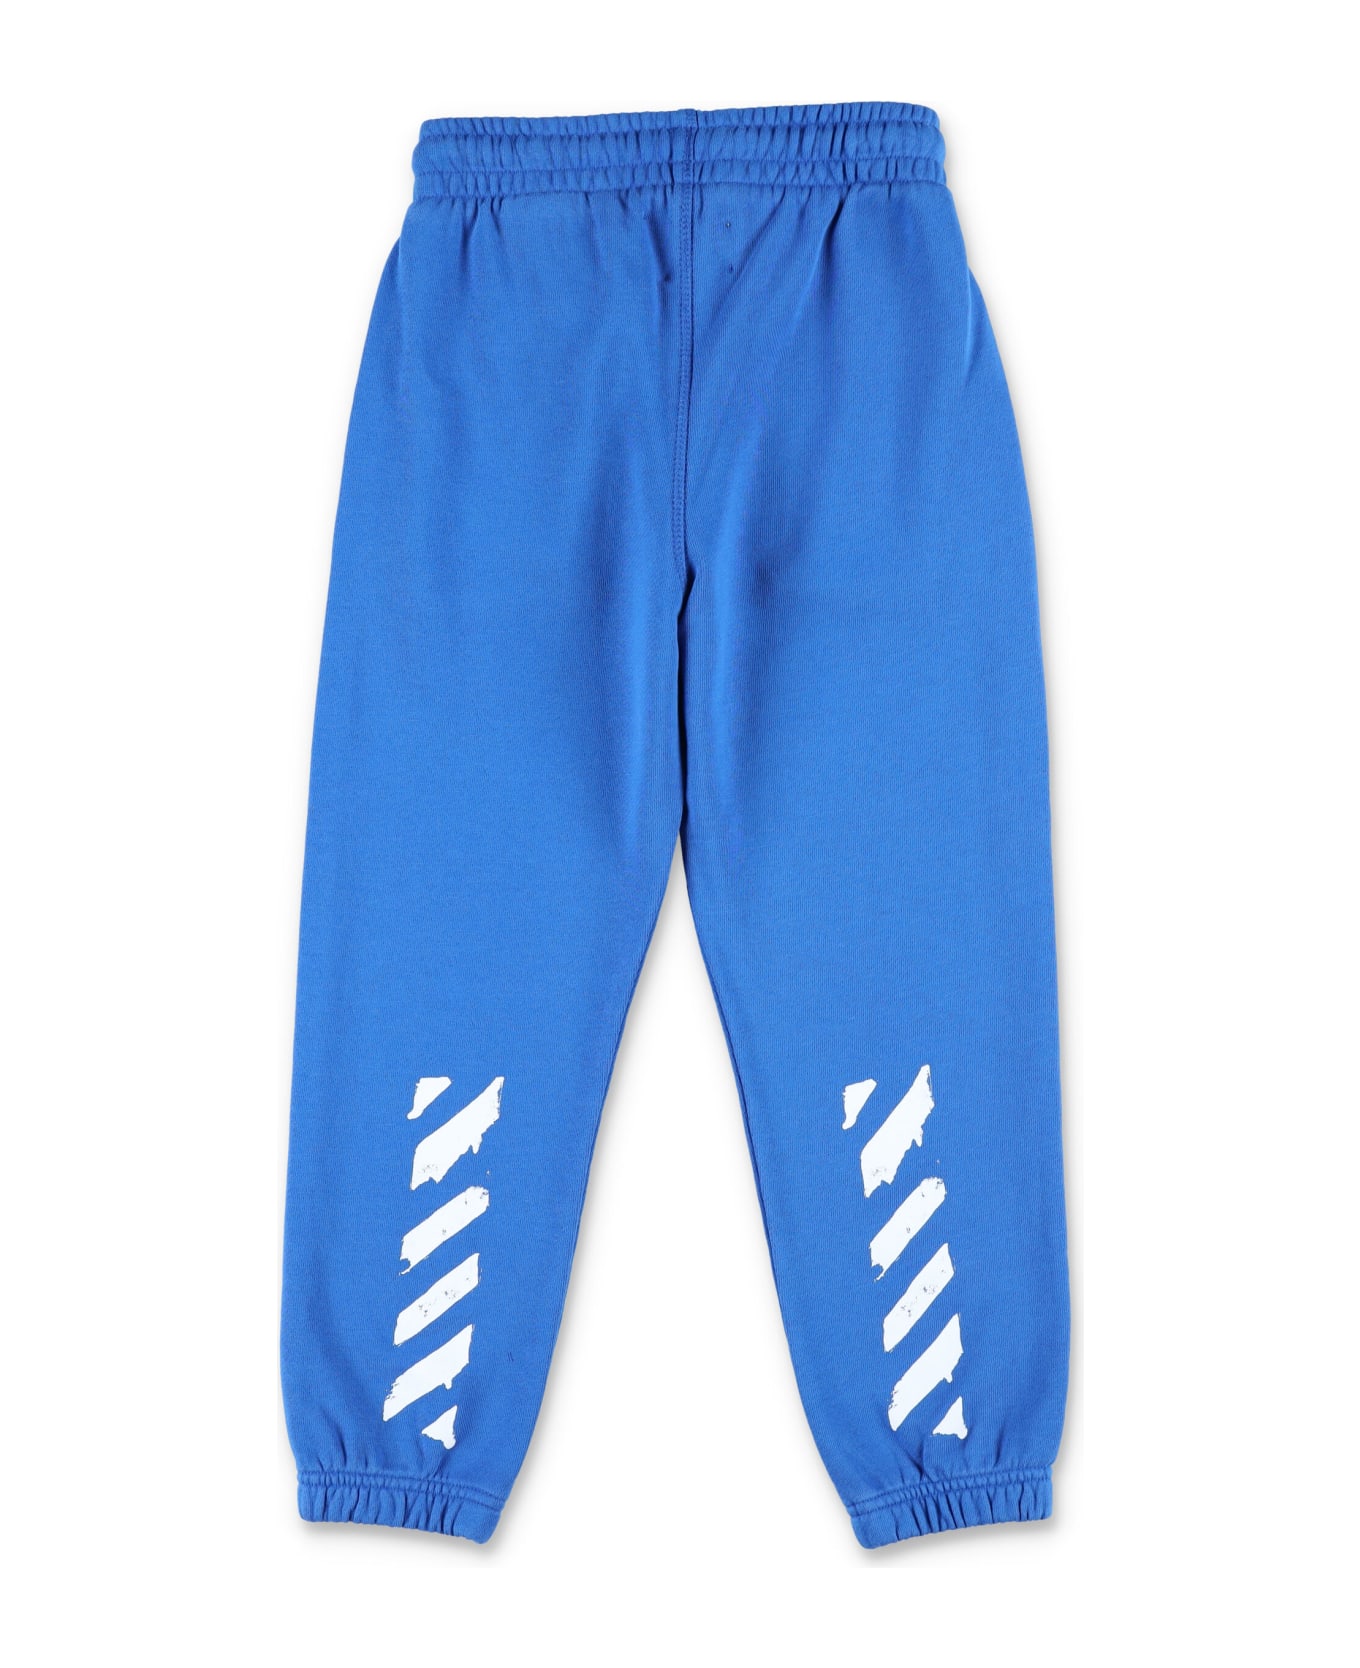 Off-White Paint Graphic Sweatpants - NAVY